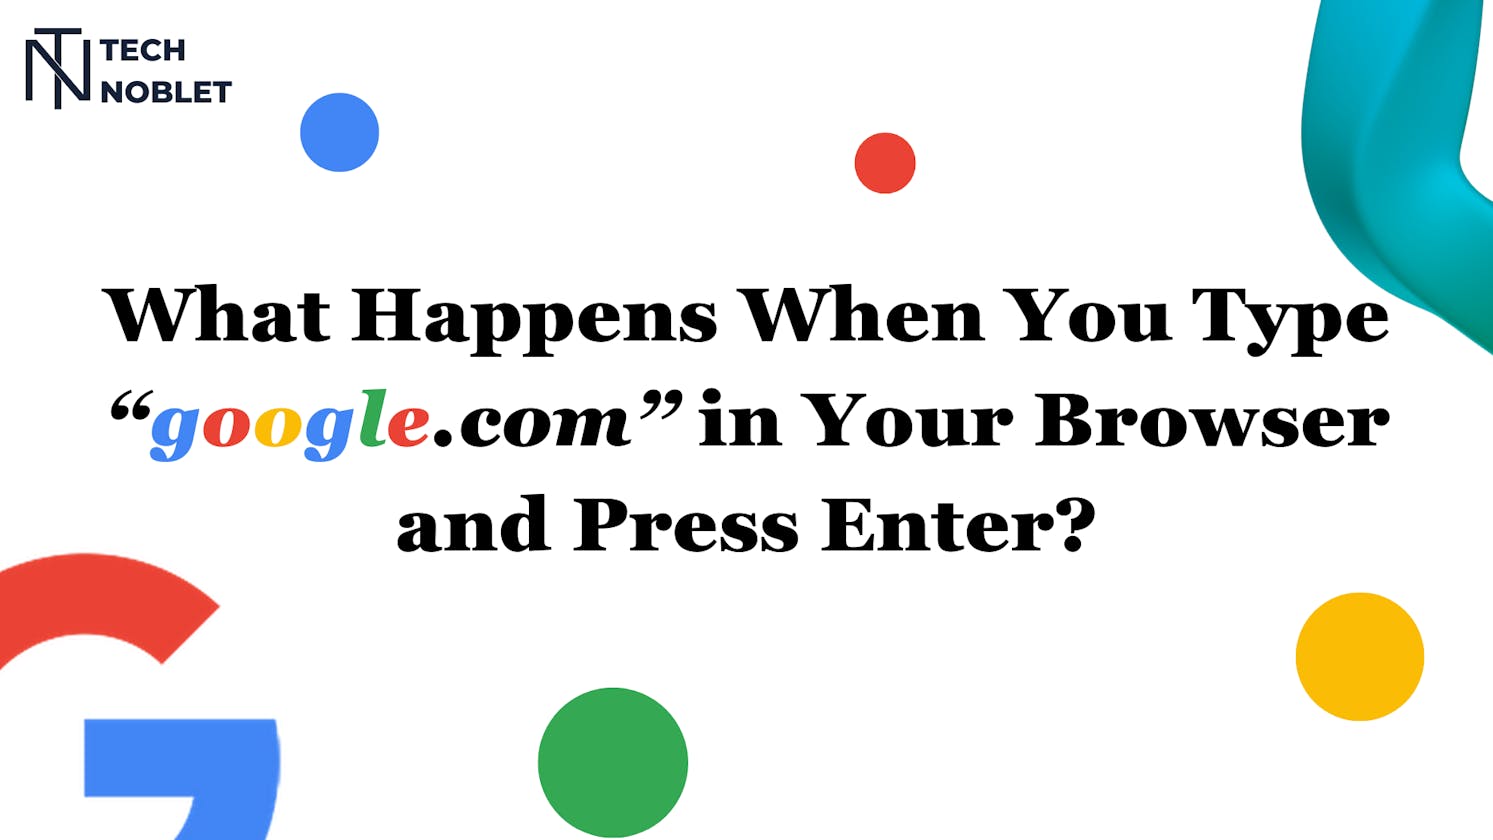 What Happens When You Type "google.com" in Your Browser and Press Enter?